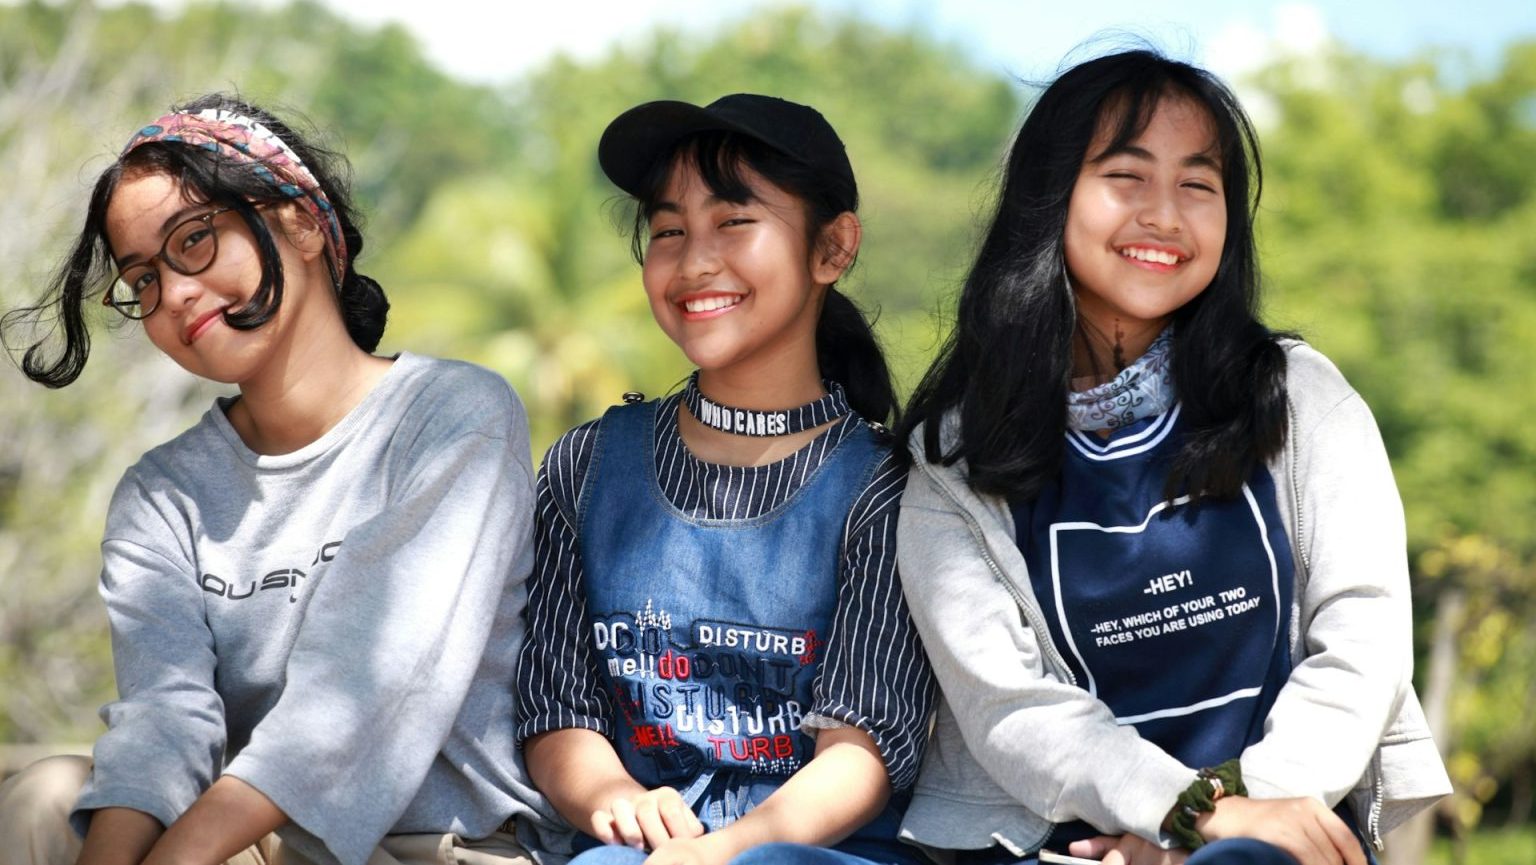 Three young girls sitting on a bench and smiling.